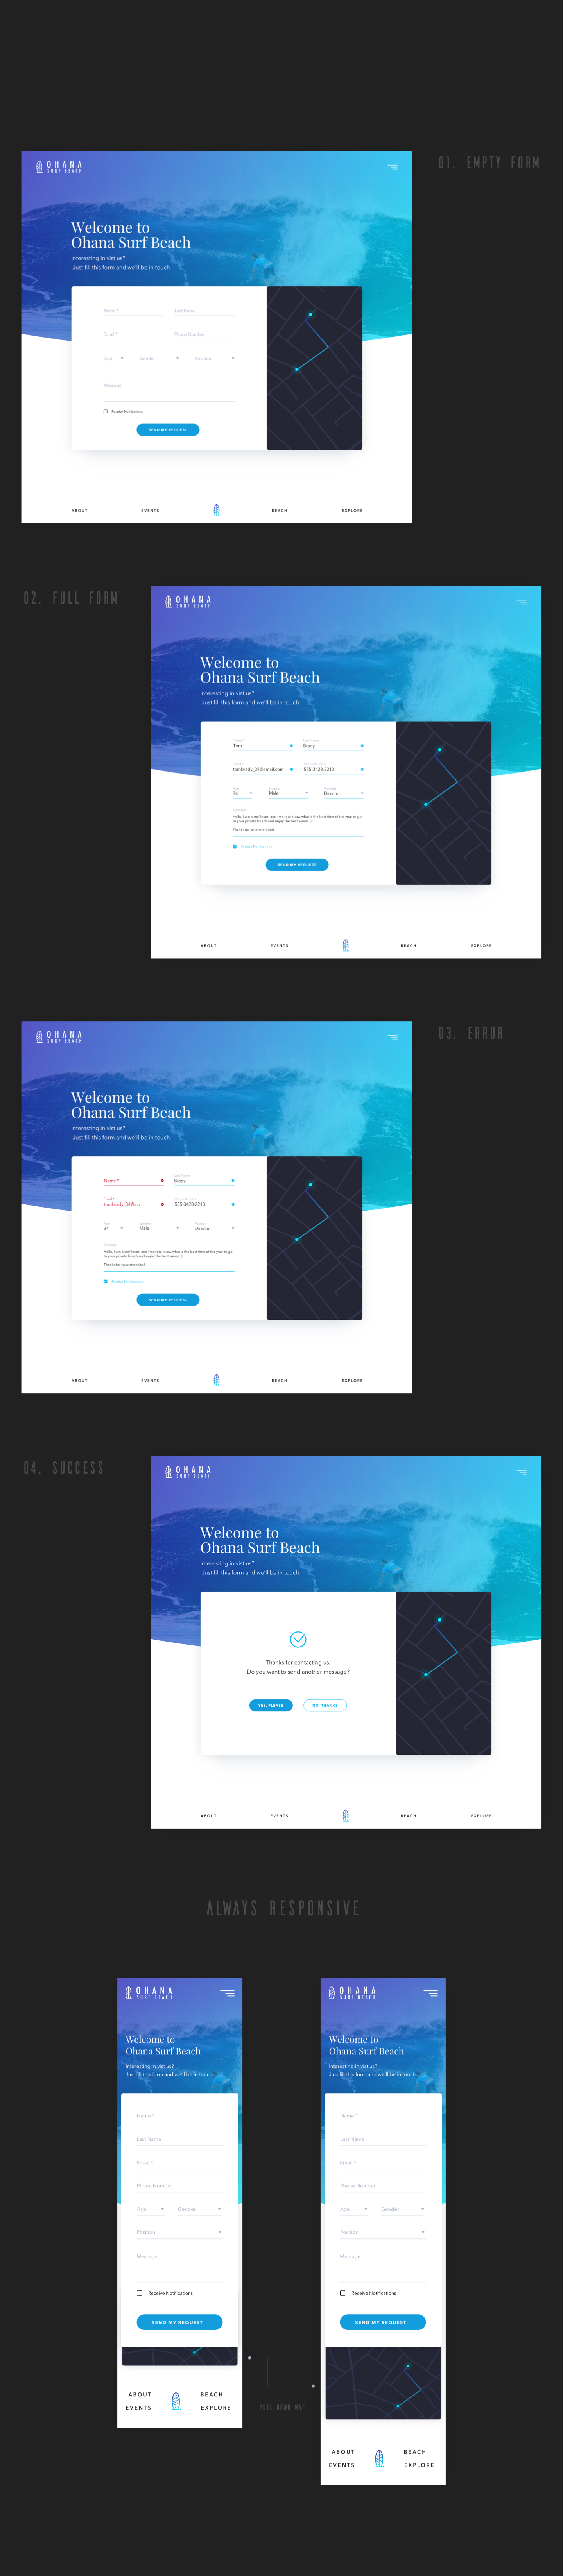 Contact Form by Mstechdesign.com on Dribbble